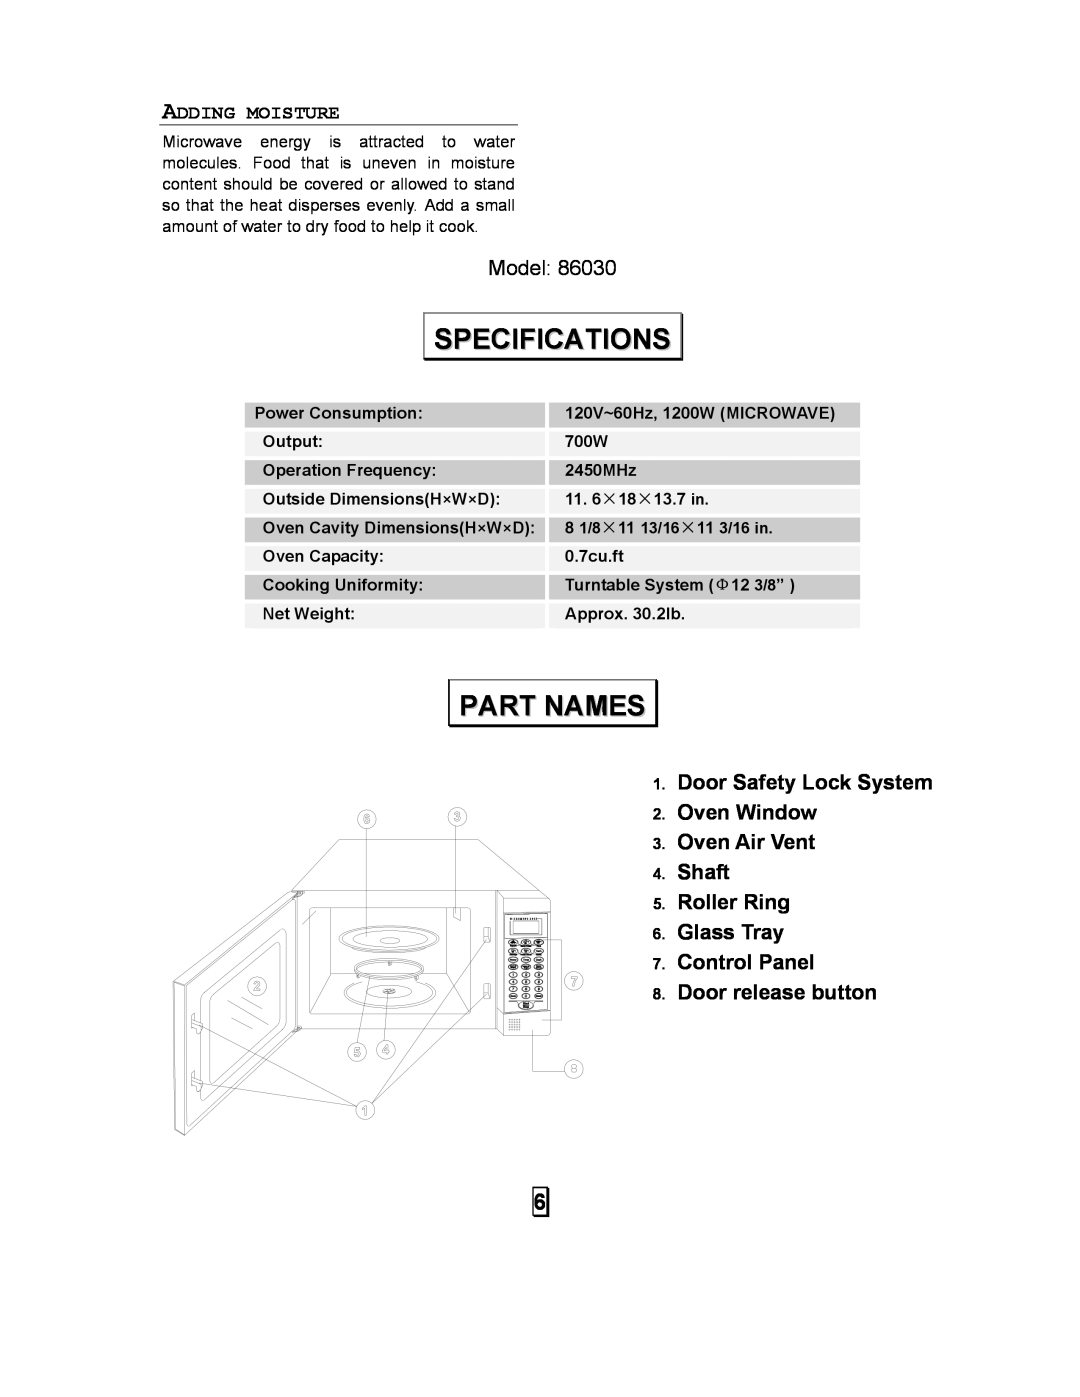 Sears 86030 Specifications, Part Names, Adding Moisture, Model, Door Safety Lock System 2.Oven Window, Door release button 